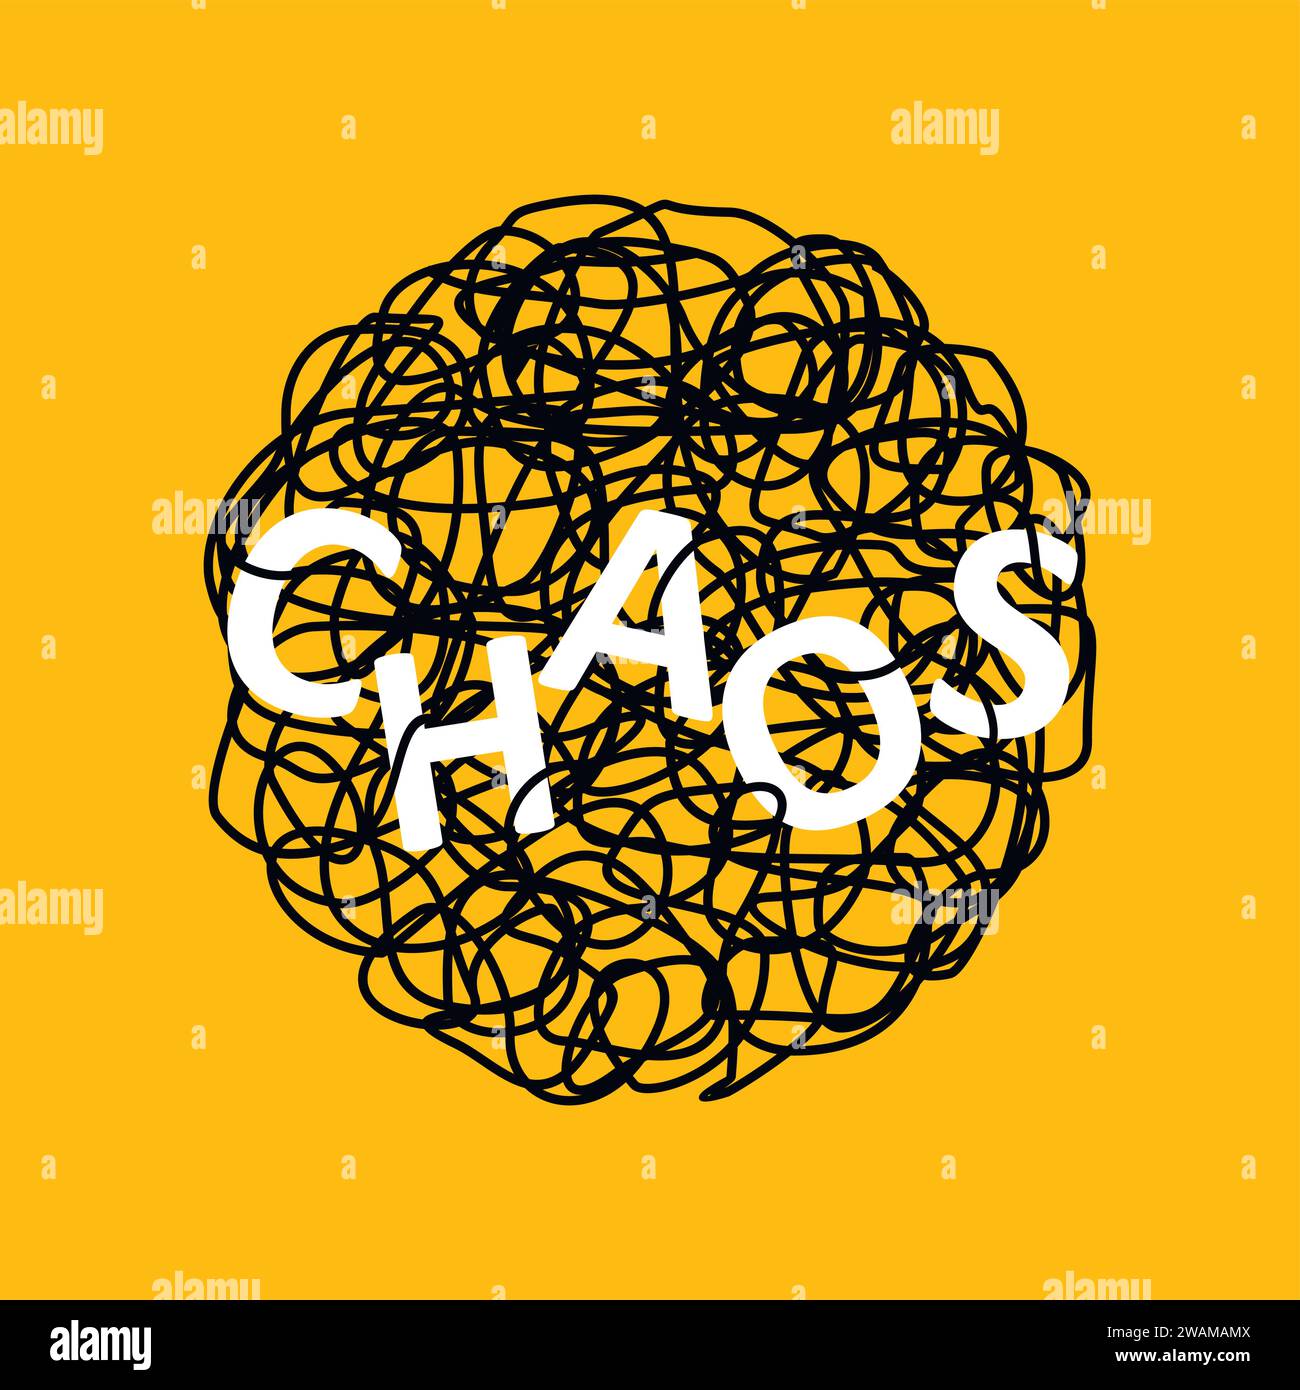 Abstract hand drawn illustration of chaos over tangled mess scribble or doodle on yellow background. Metaphor of problem, difficult situation, chaos a Stock Vector